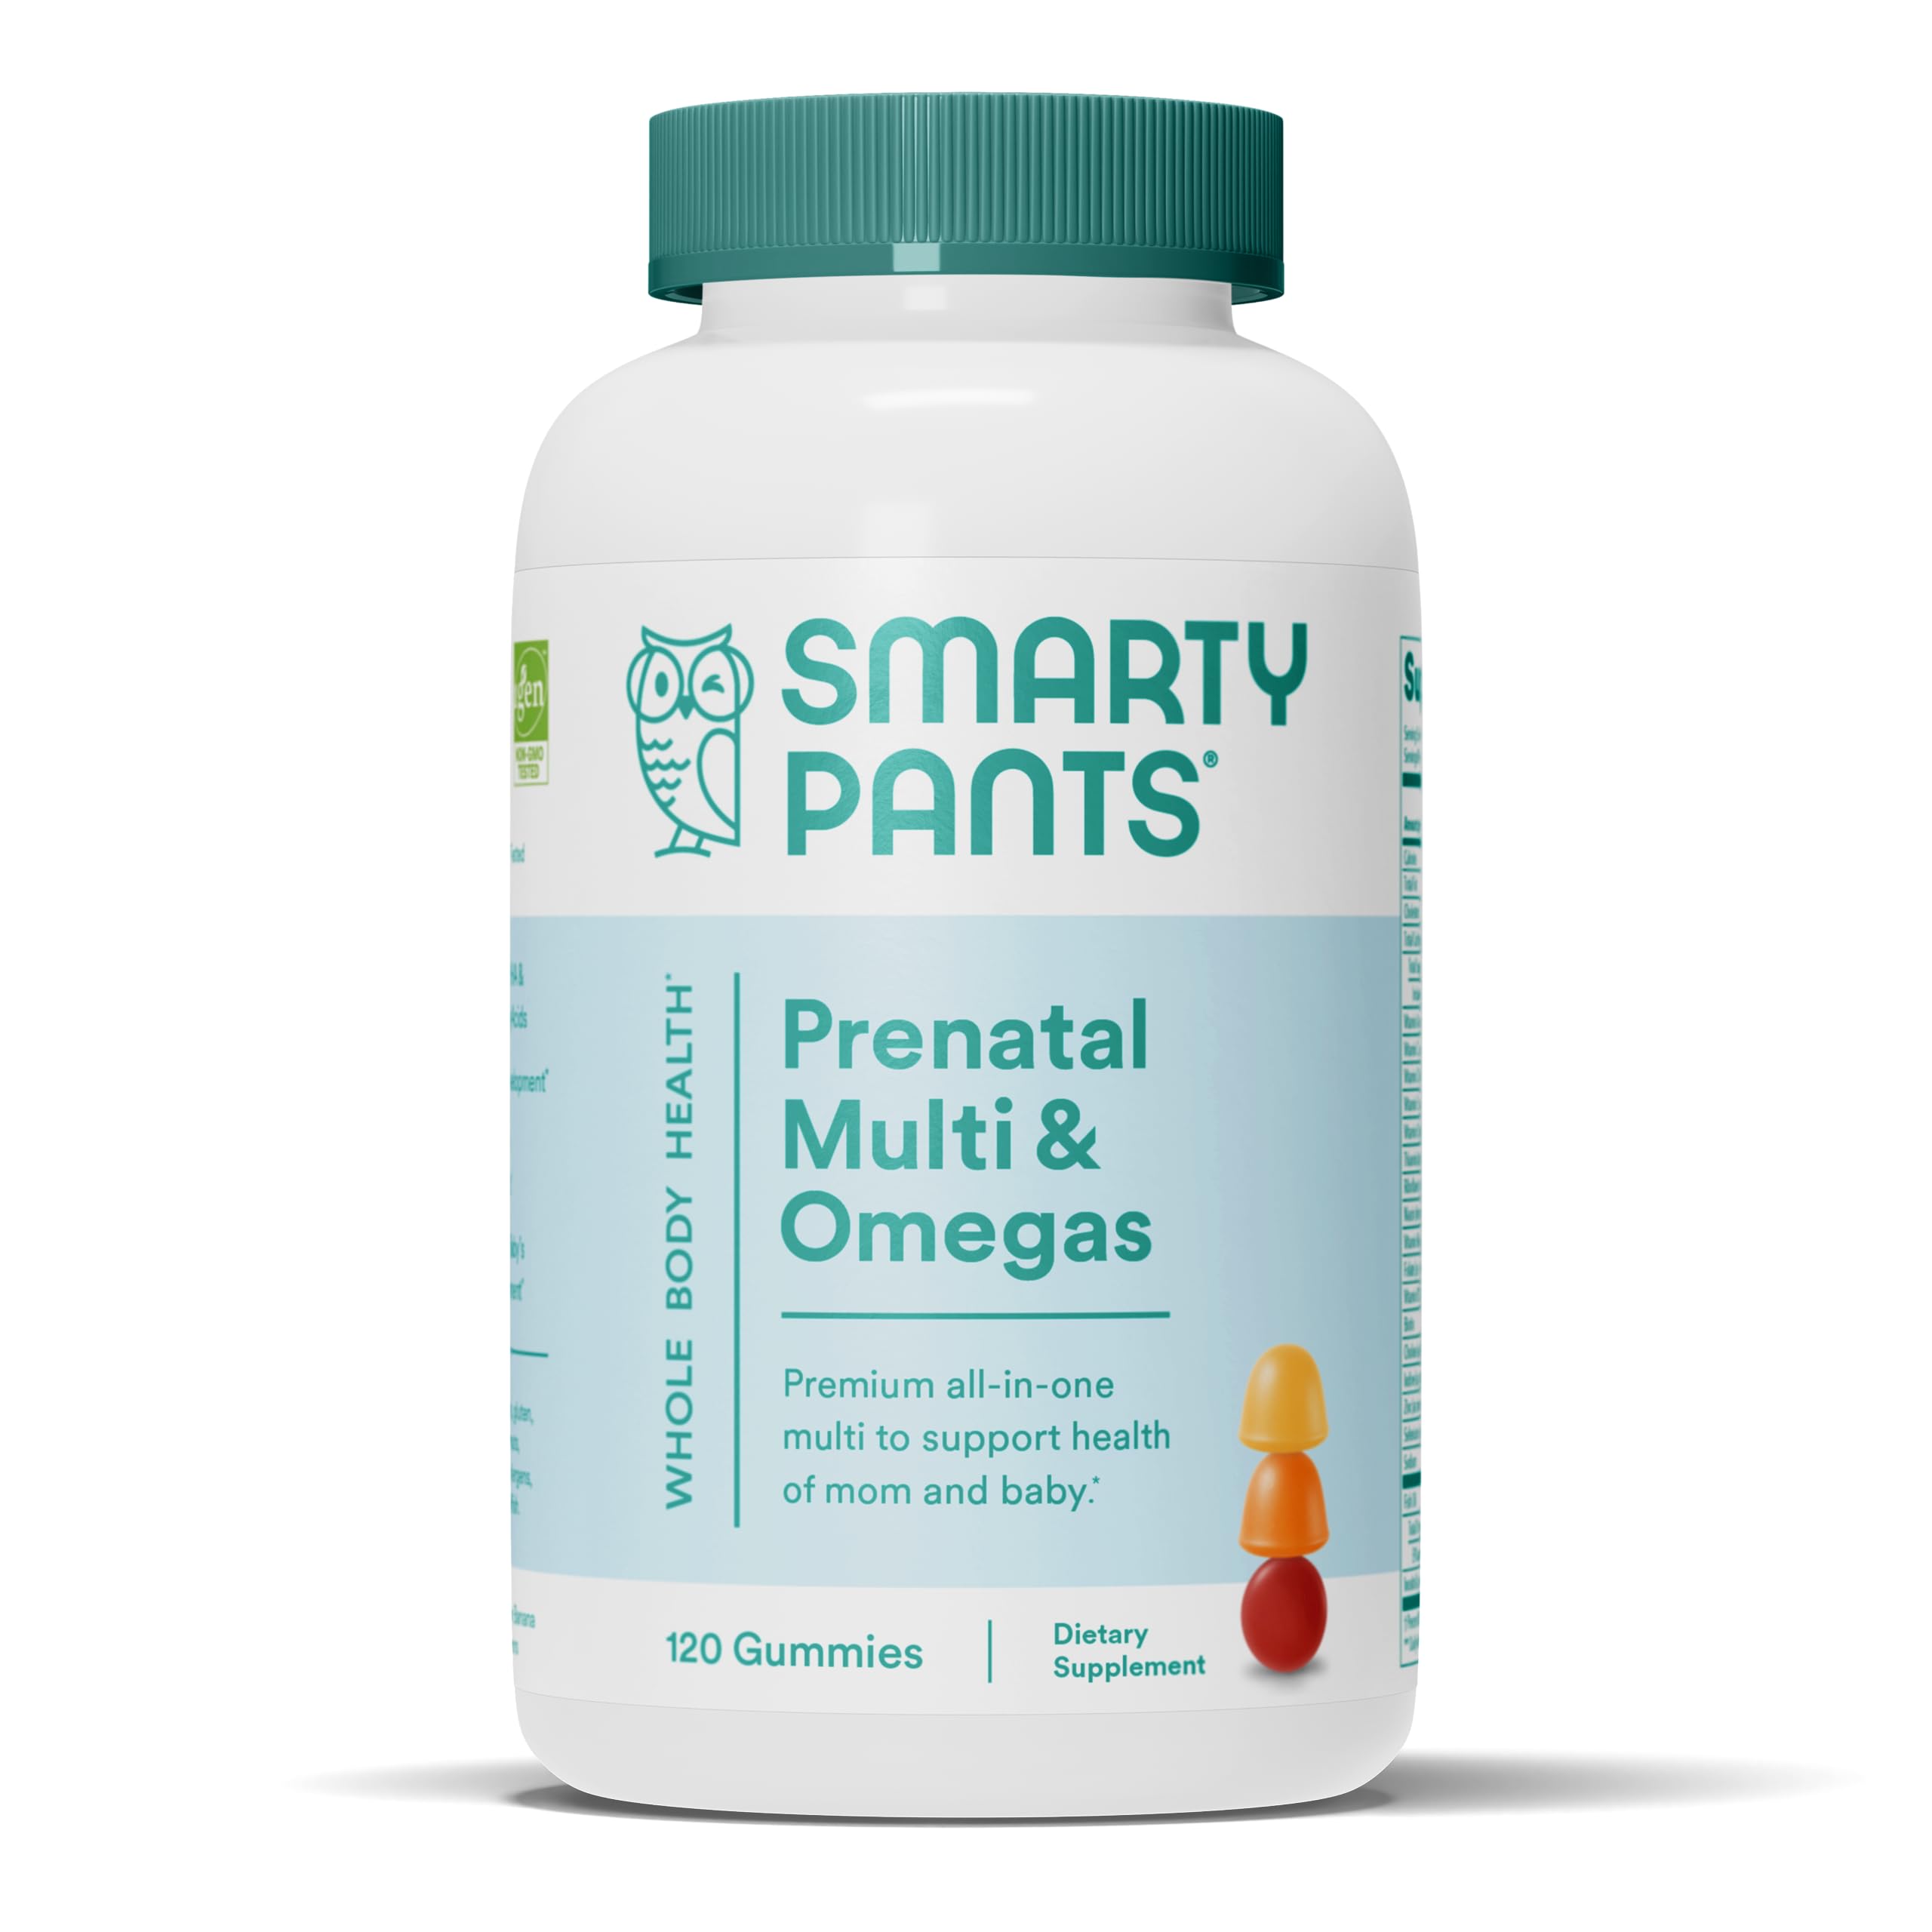 SmartyPants Prenatal Vitamins for Women with DHA and Folate - Daily Gummy Multivitamin: Vitamin C, B12, D3, Zinc for Immunity & Omega 3 Fish Oil, 120 Count (30 Day Supply)